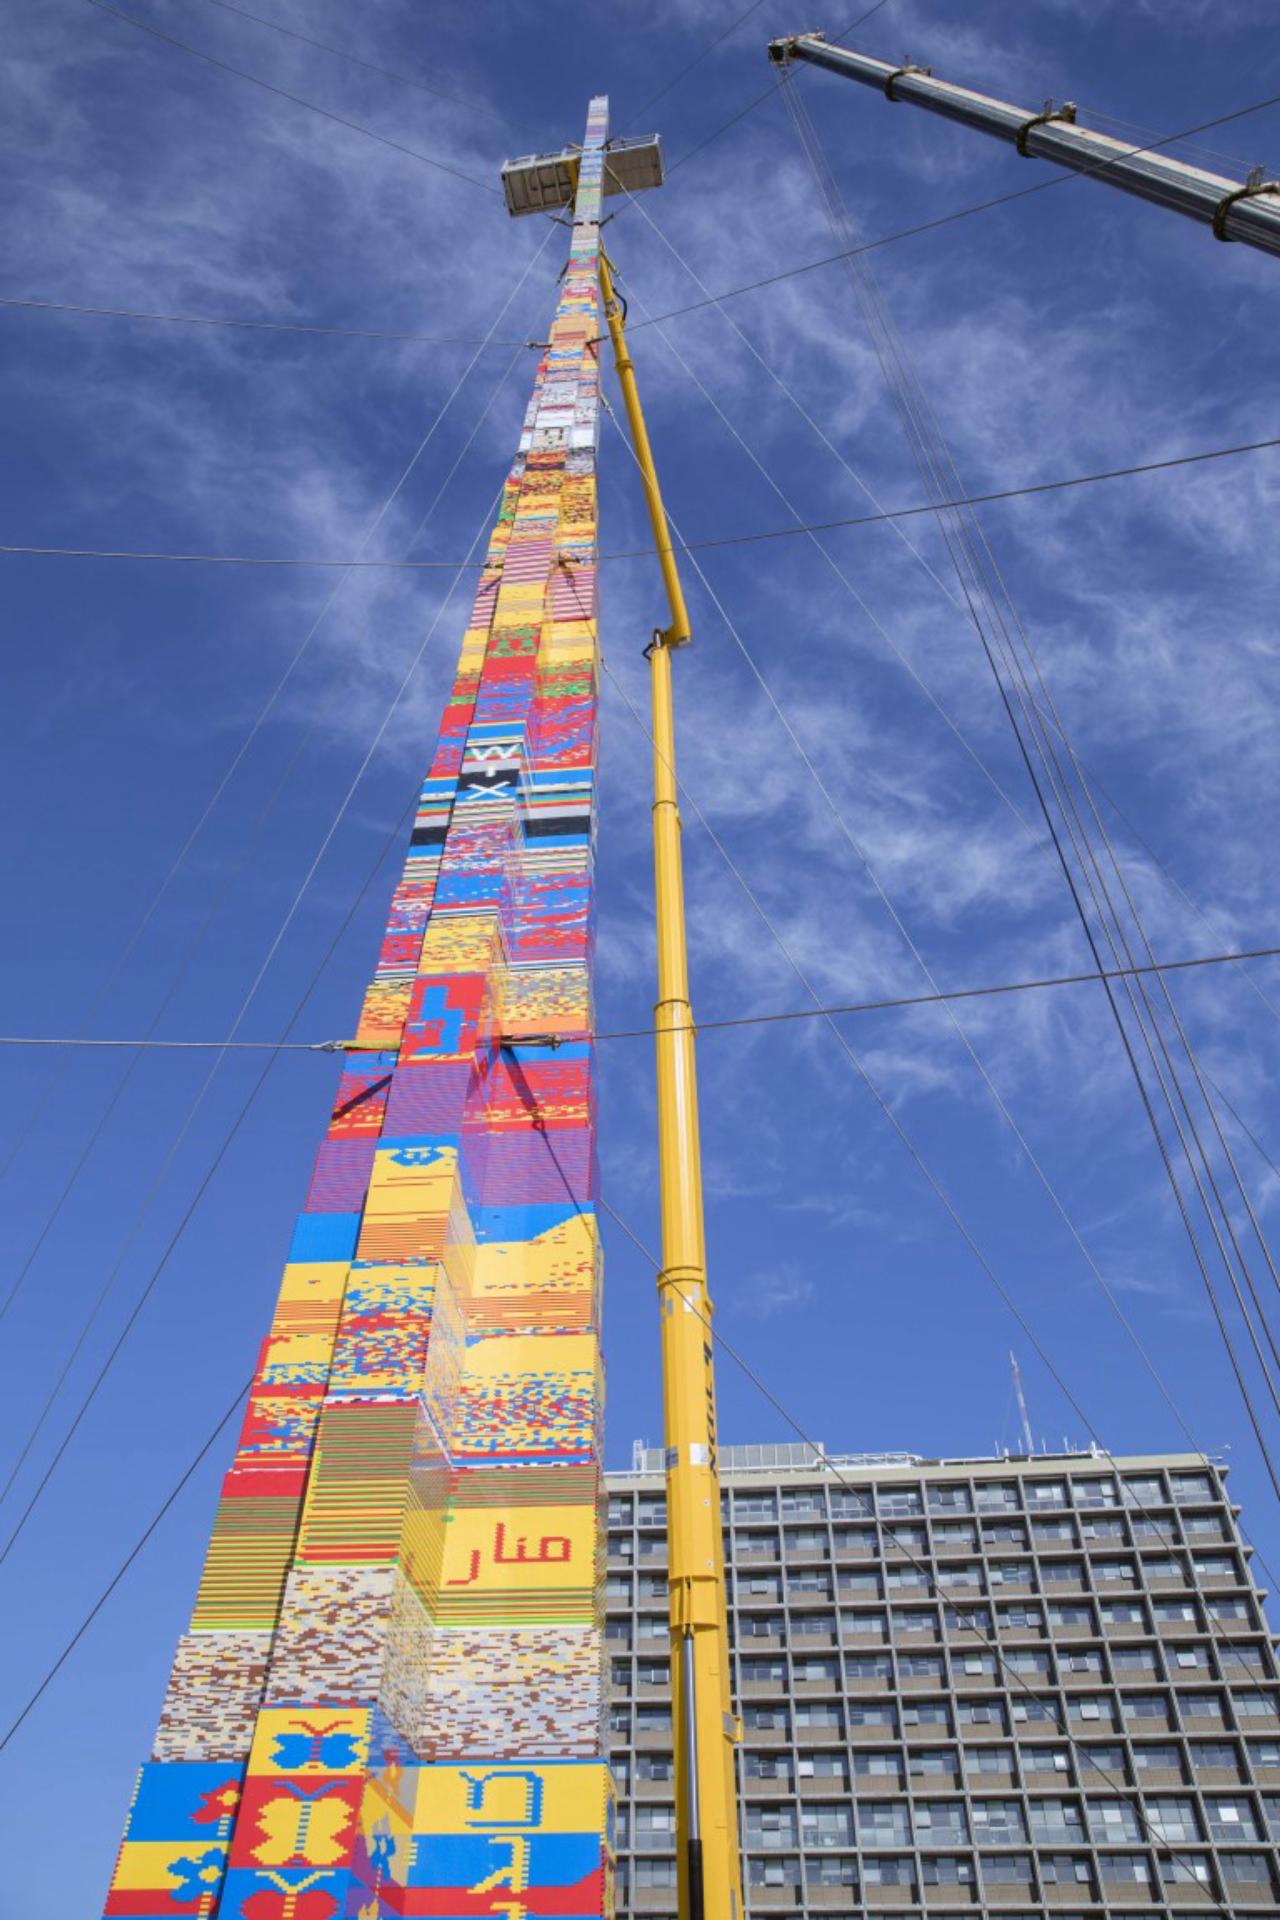 A picture taken on December 27, 2017 shows a LEGO tower under construction in Tel Aviv's Rabin Square, as the city attempts to break Guinness World Record of the highest such structure. / AFP PHOTO / JACK GUEZ